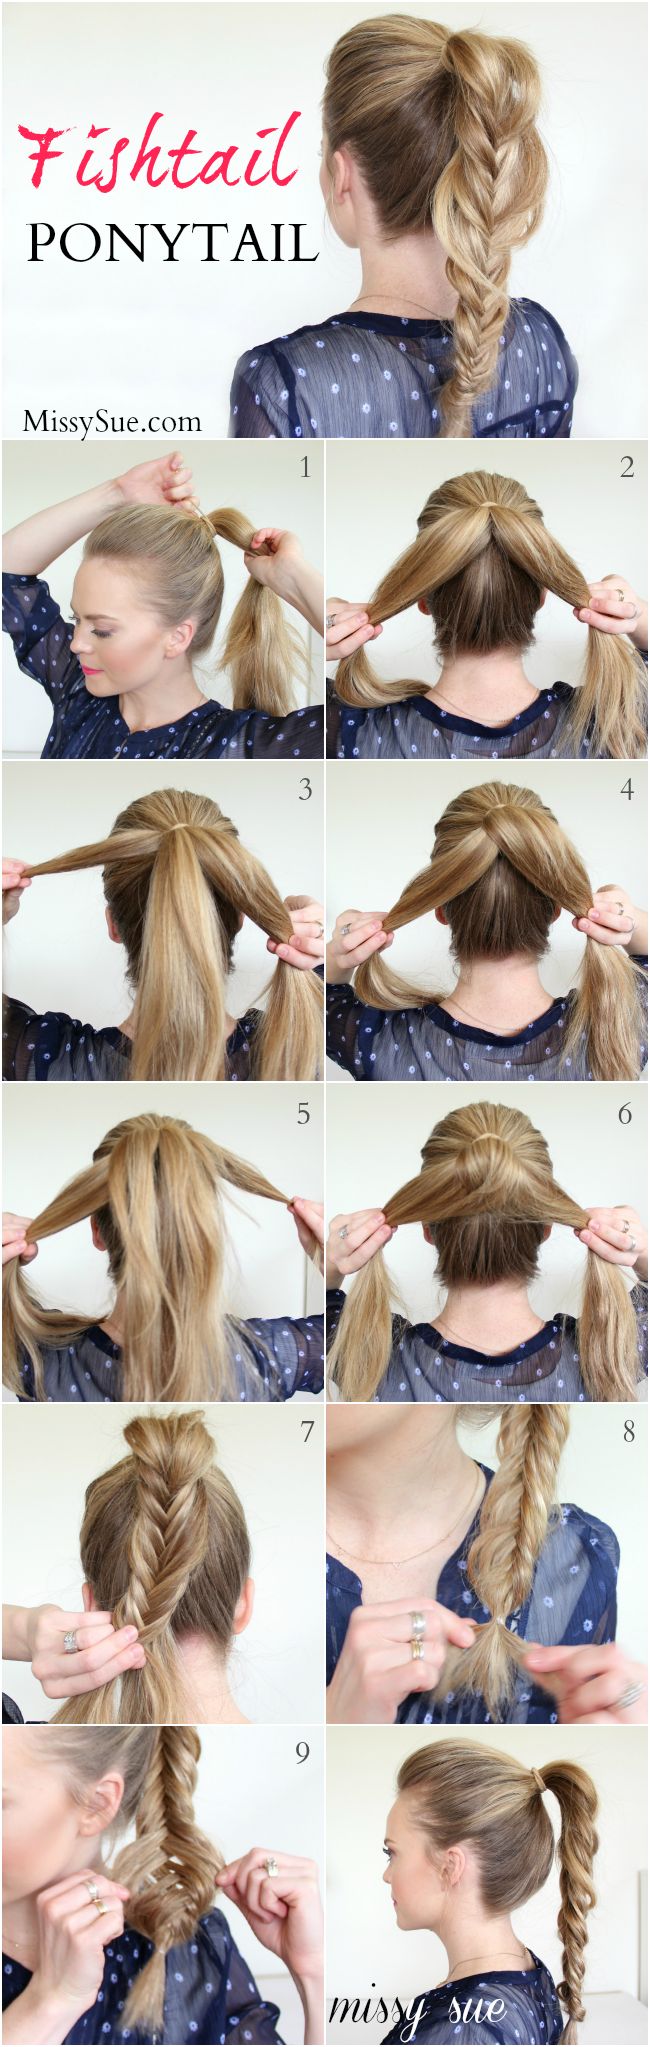 15 simple braid tutorials you've never tried